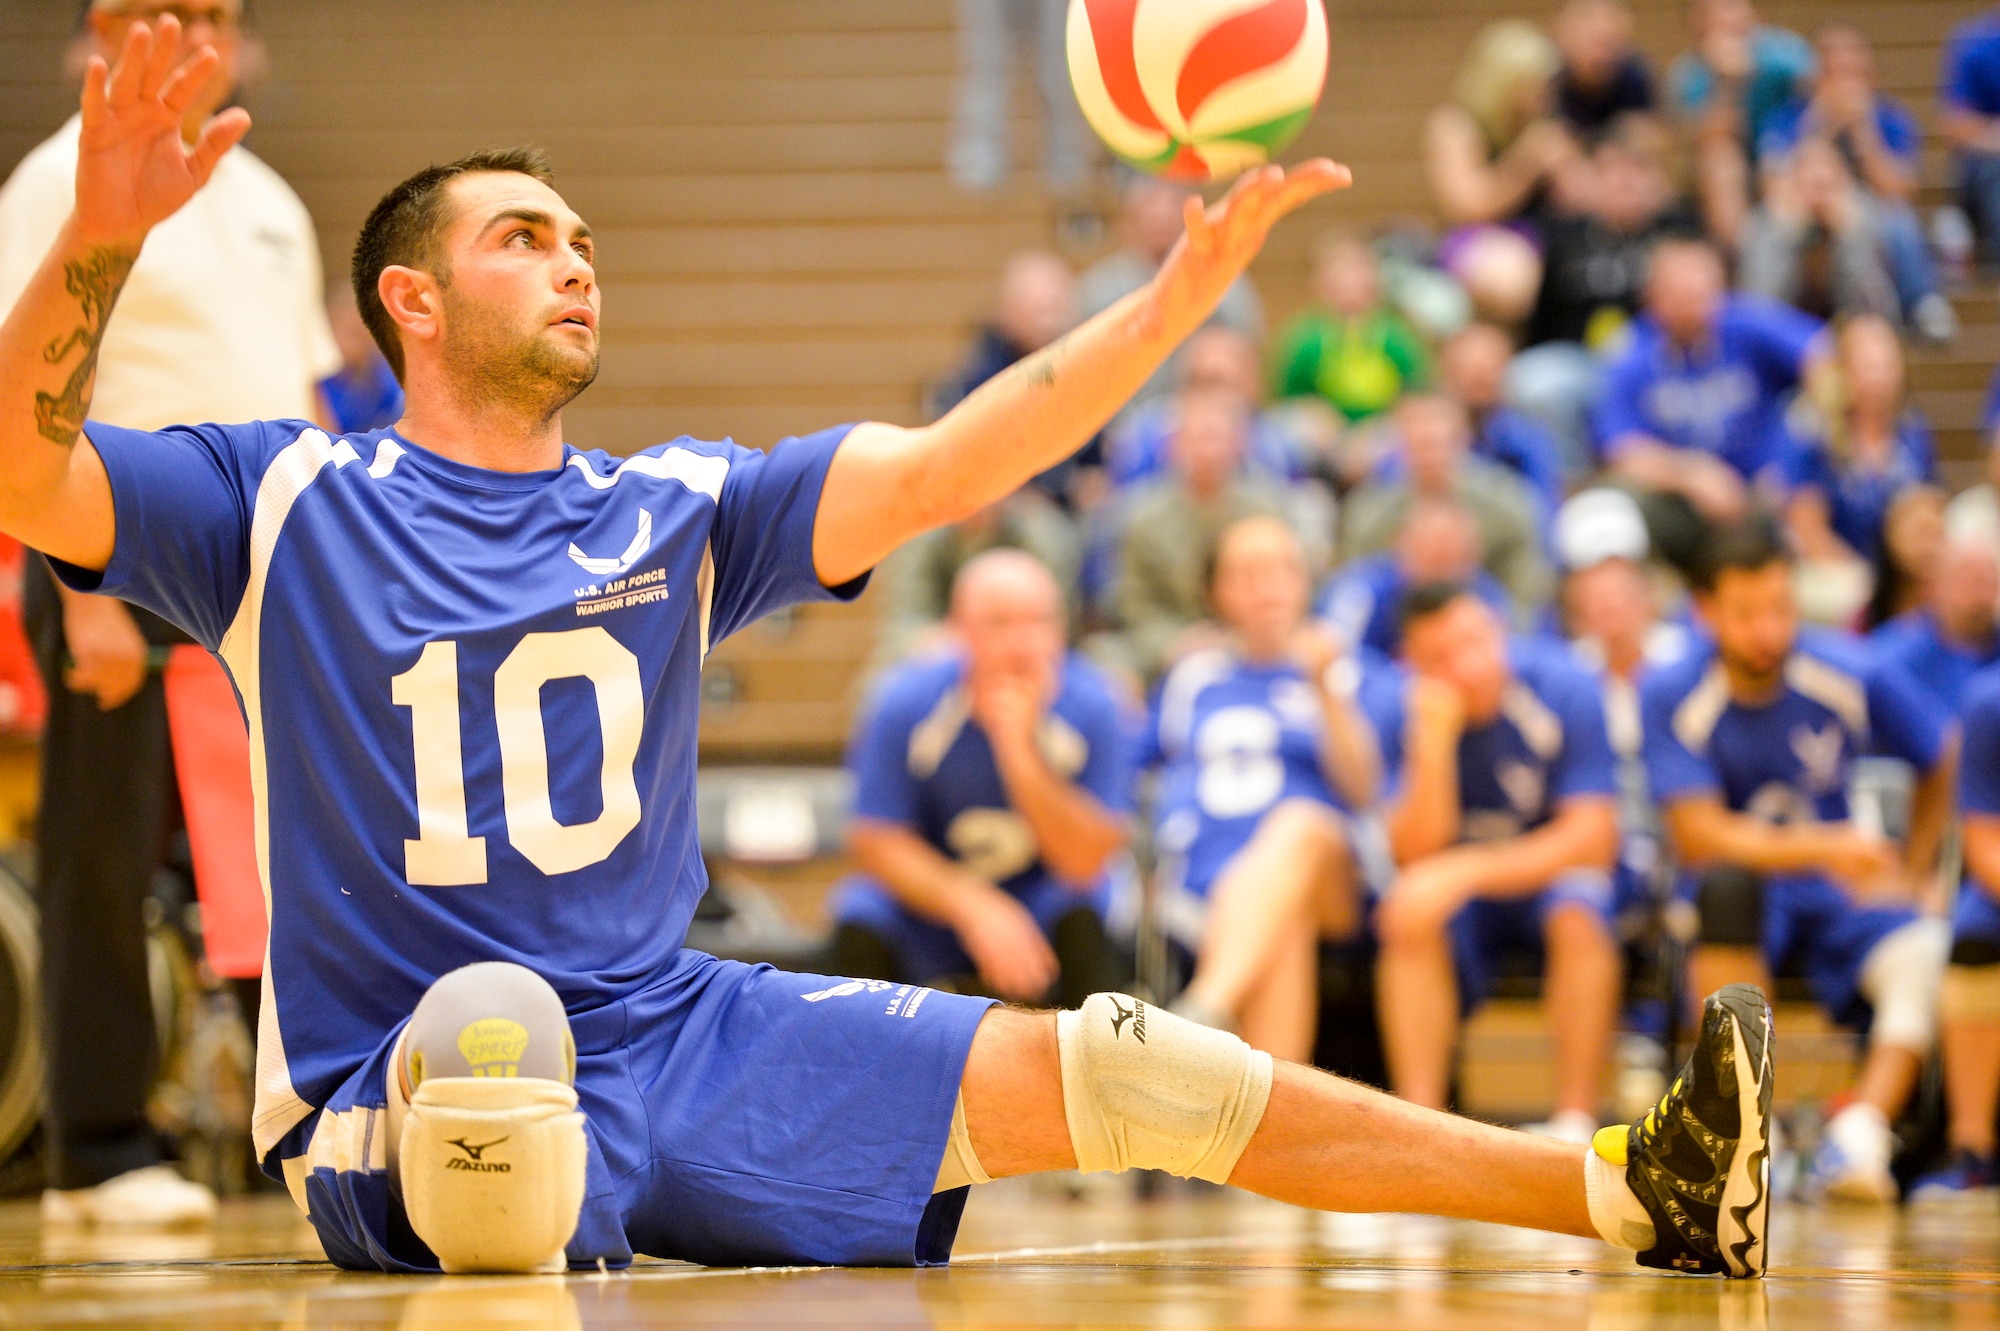 Retired Air Force Staff Sgt. Nicholas Dadgostar serves the ball during the 2014 Warrior Games sitting volleyball bronze medal match between the Air Force and the Army Oct. 1, 2014, at the U.S. Olympic Training Center in Colorado Springs, Colo. The Army beat the Air Force in two sets, 25-20, 25-19. (U.S. Air Force photo/Staff Sgt. Devon Suits)